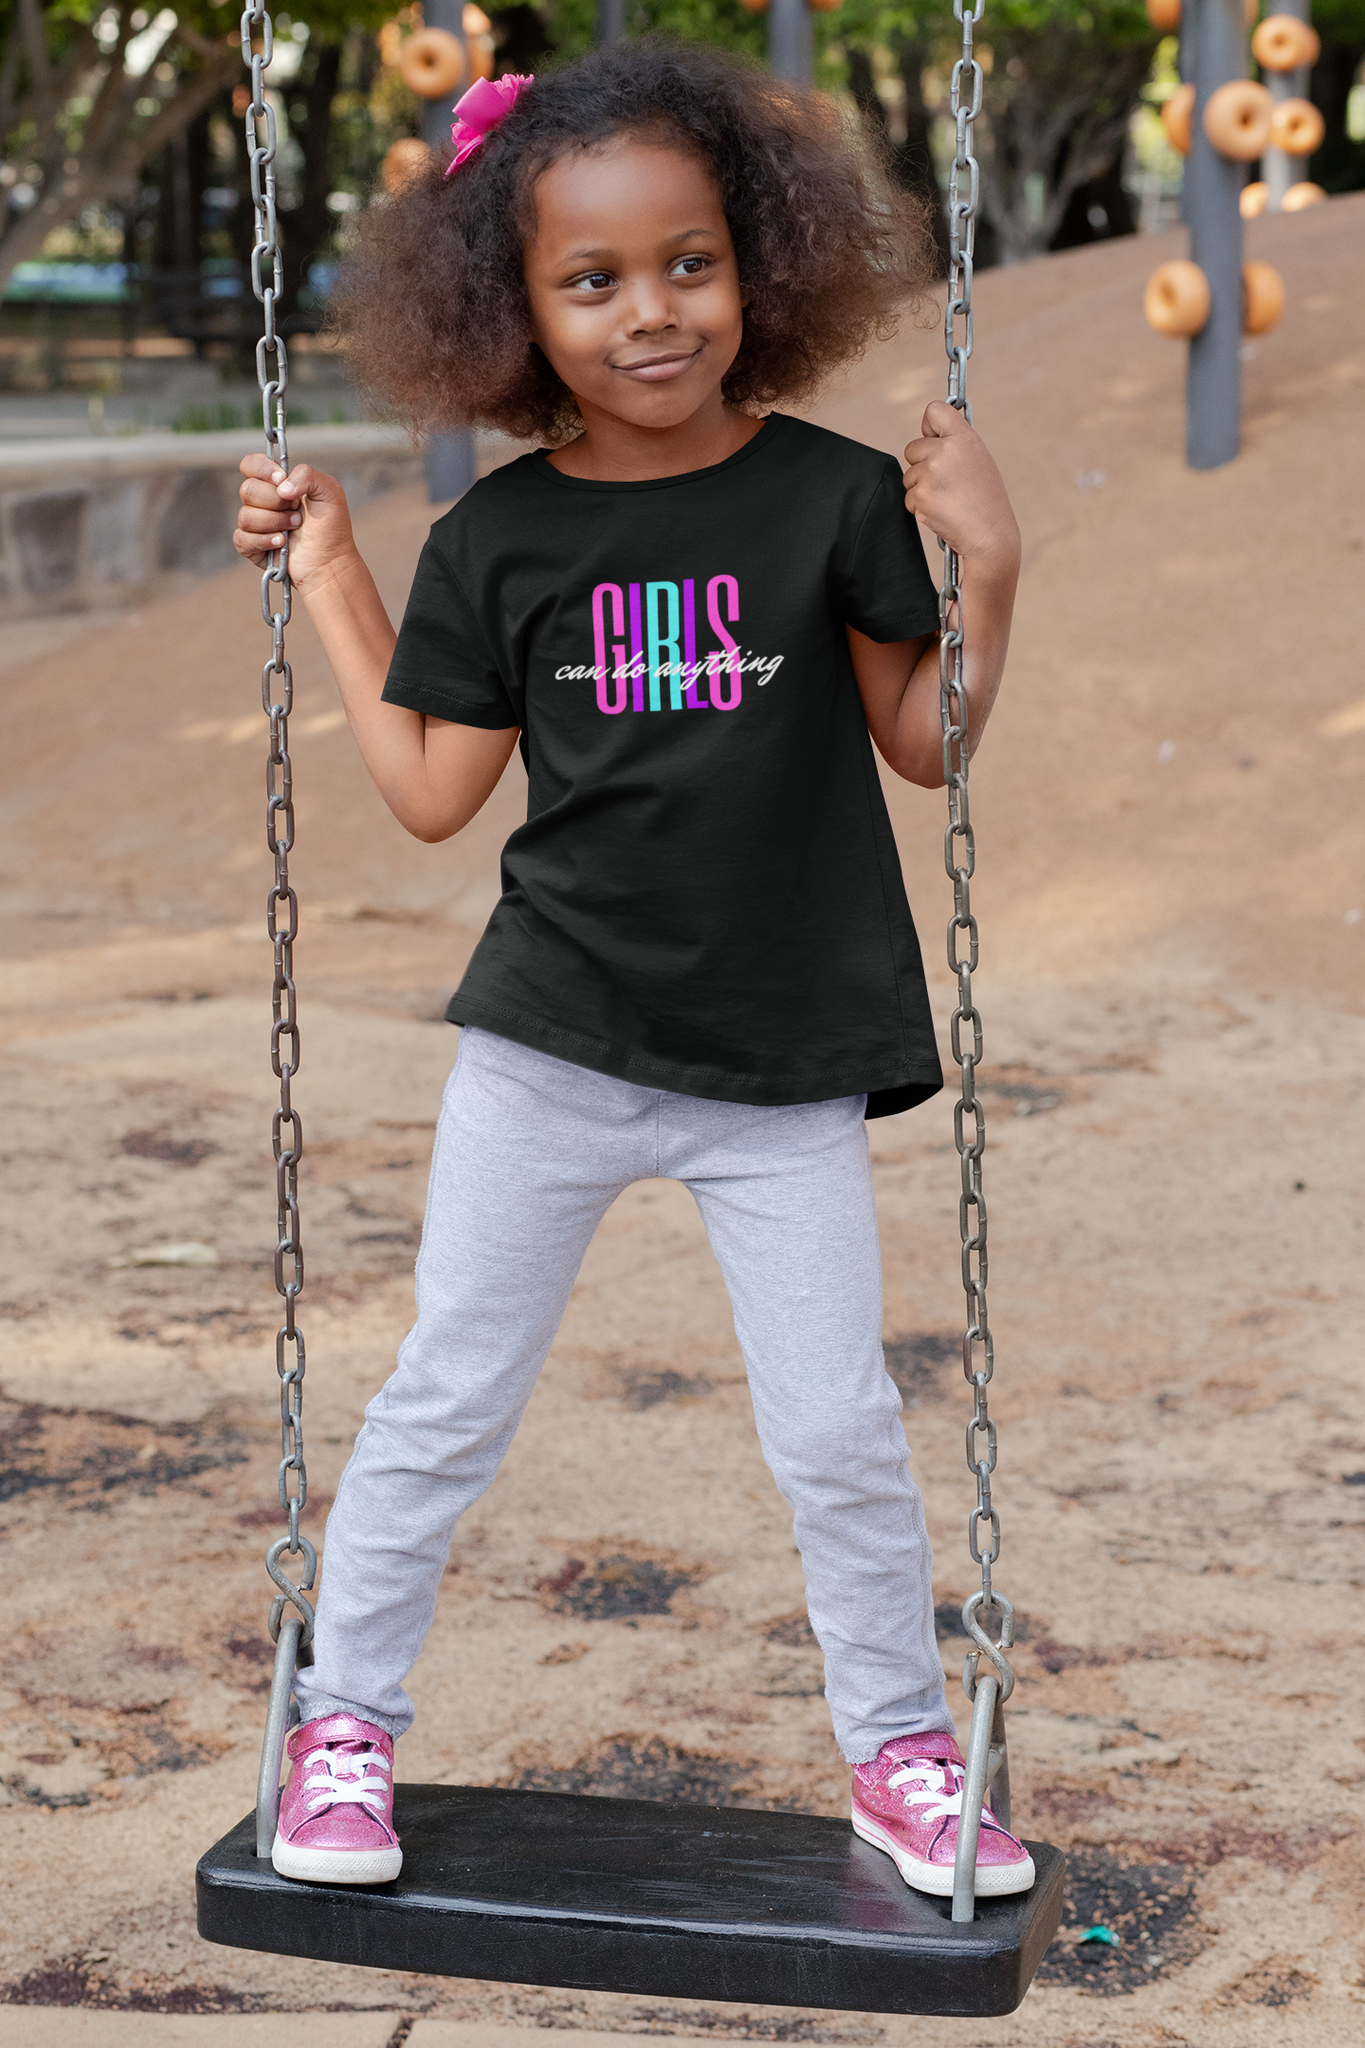 Girls Can Do Anything Kid Tee